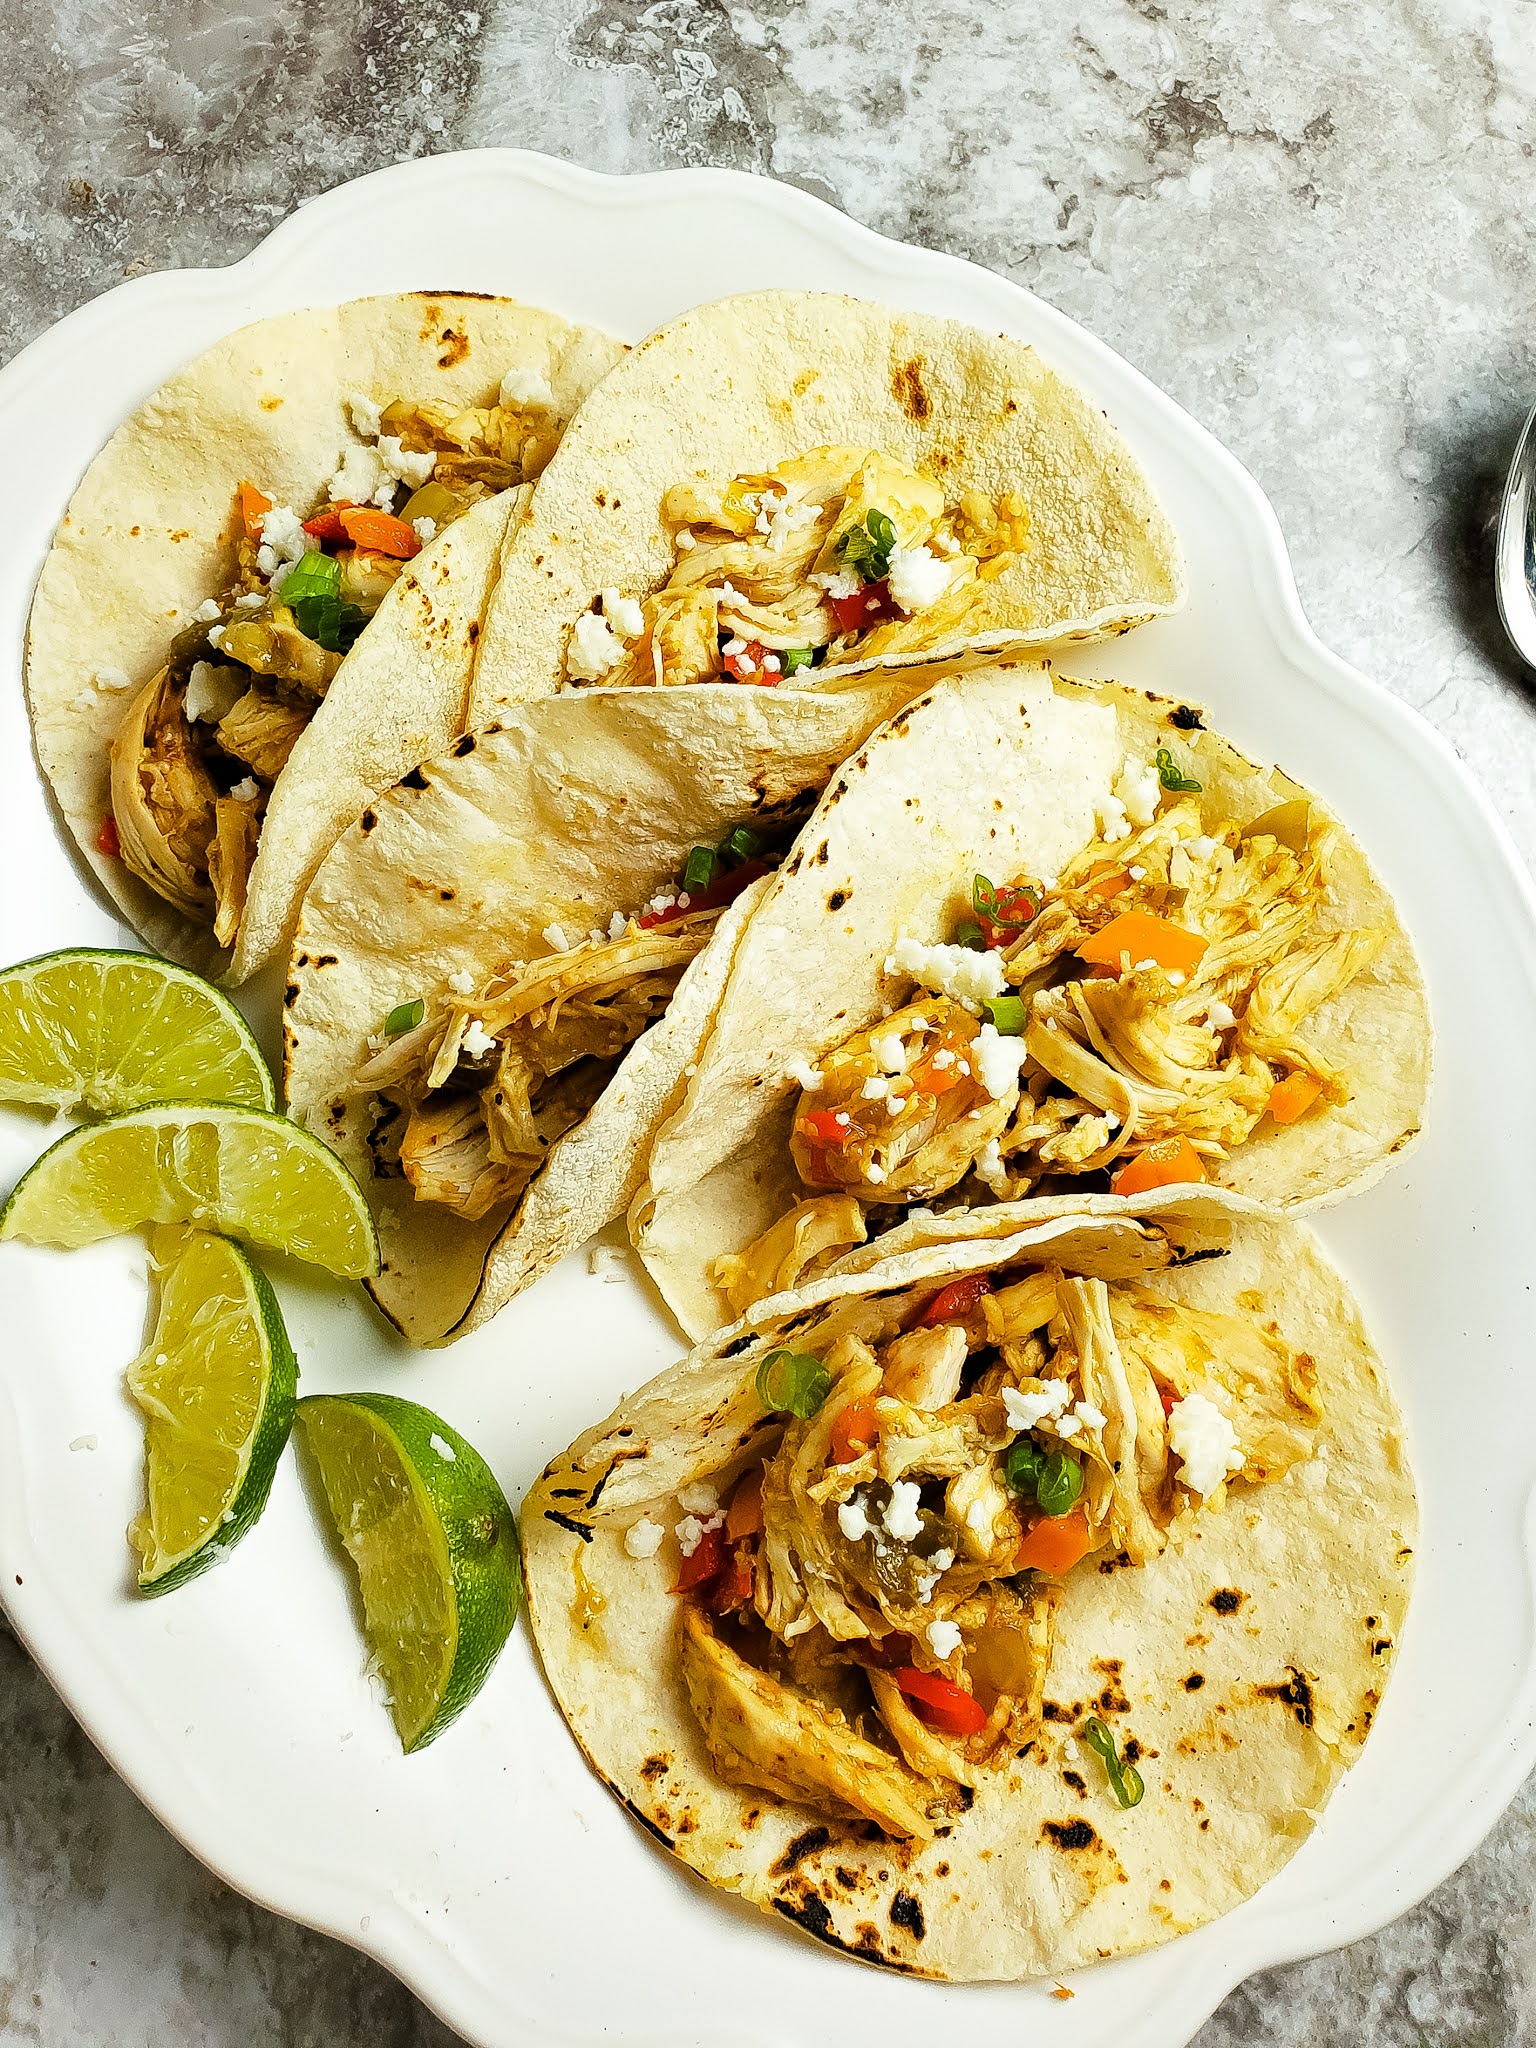 Slice of Southern: Taco Tuesday: Chicken & Bell Pepper Tacos